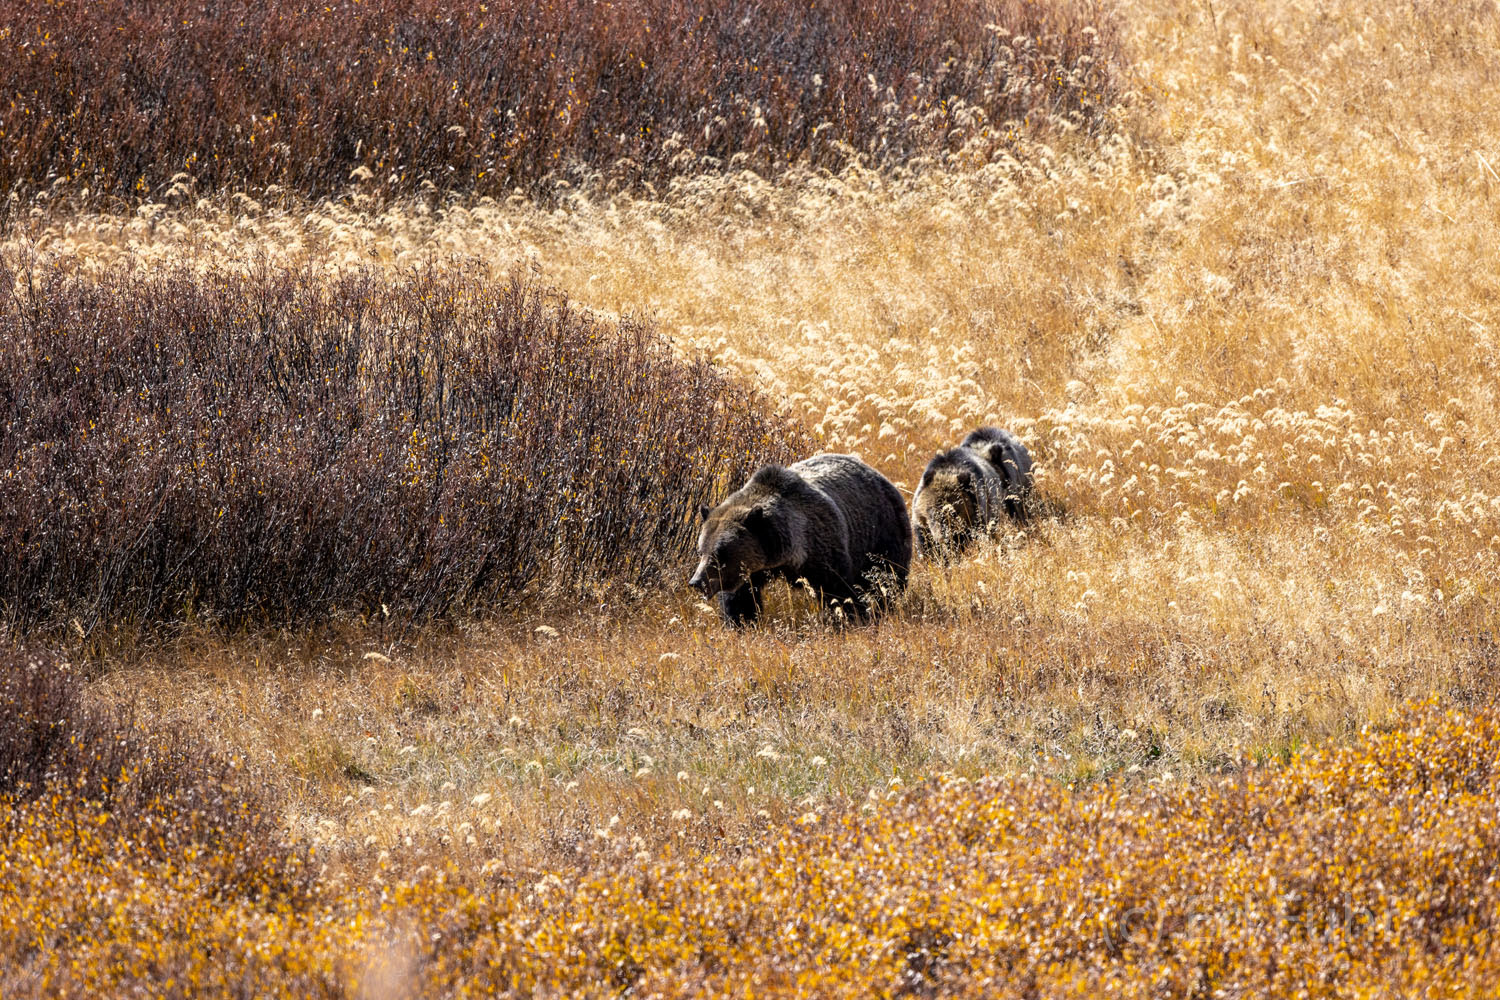 A large and beautiful Grizzly mom, known locally as Felicia, leads her two cubs across the willows and stream beds where they...